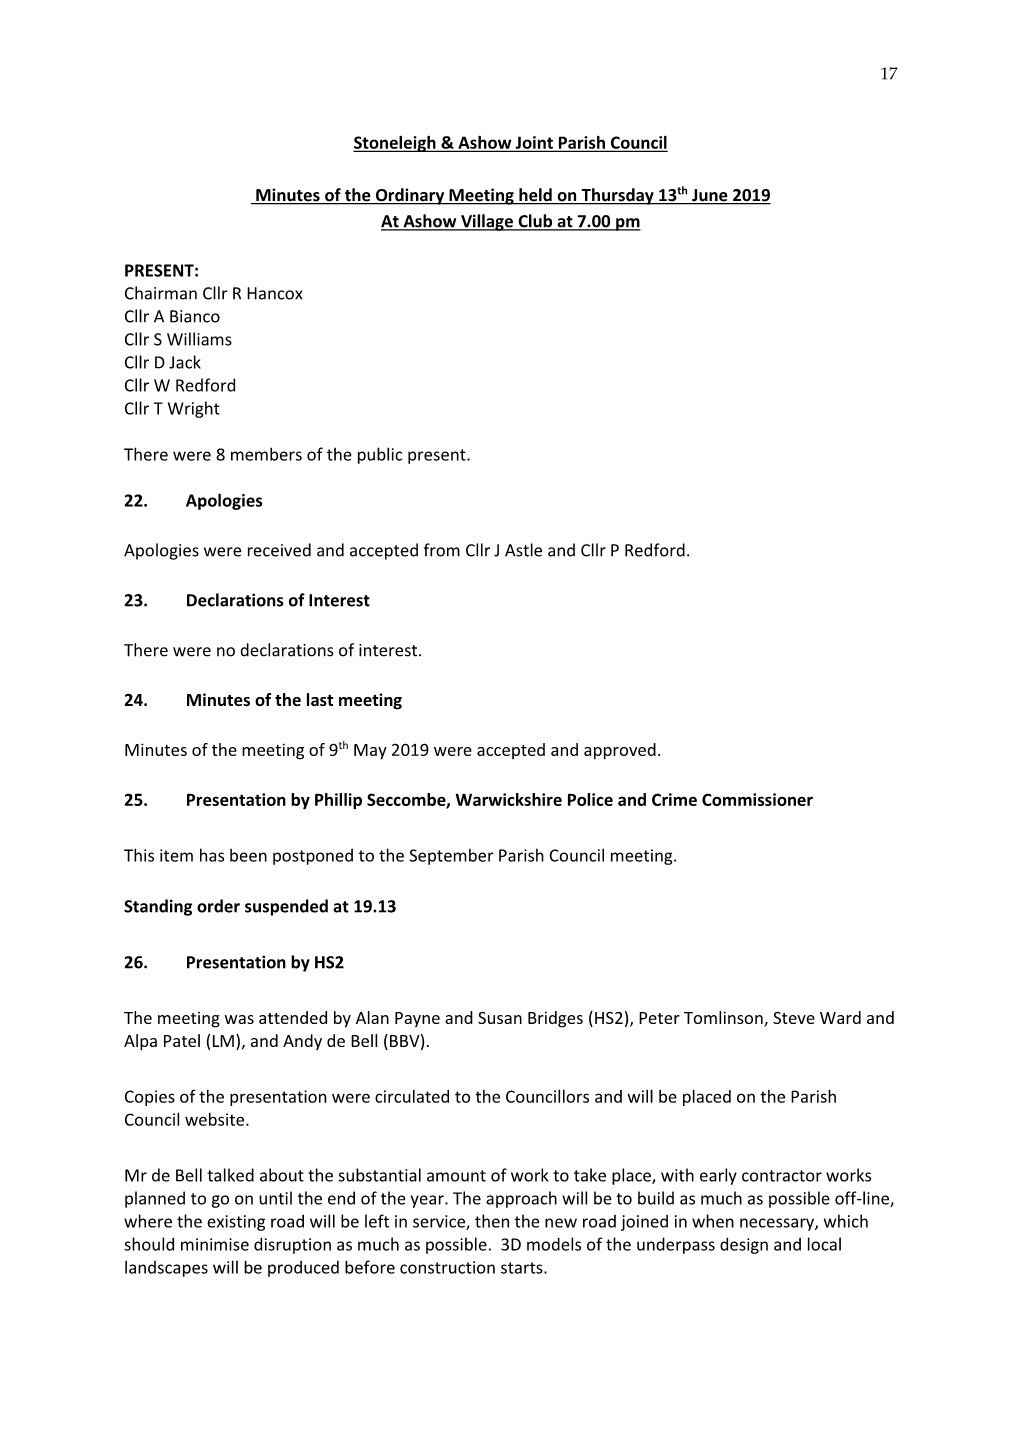 Stoneleigh & Ashow Joint Parish Council Minutes of the Ordinary Meeting Held on Thursday 13Th June 2019 at Ashow Village